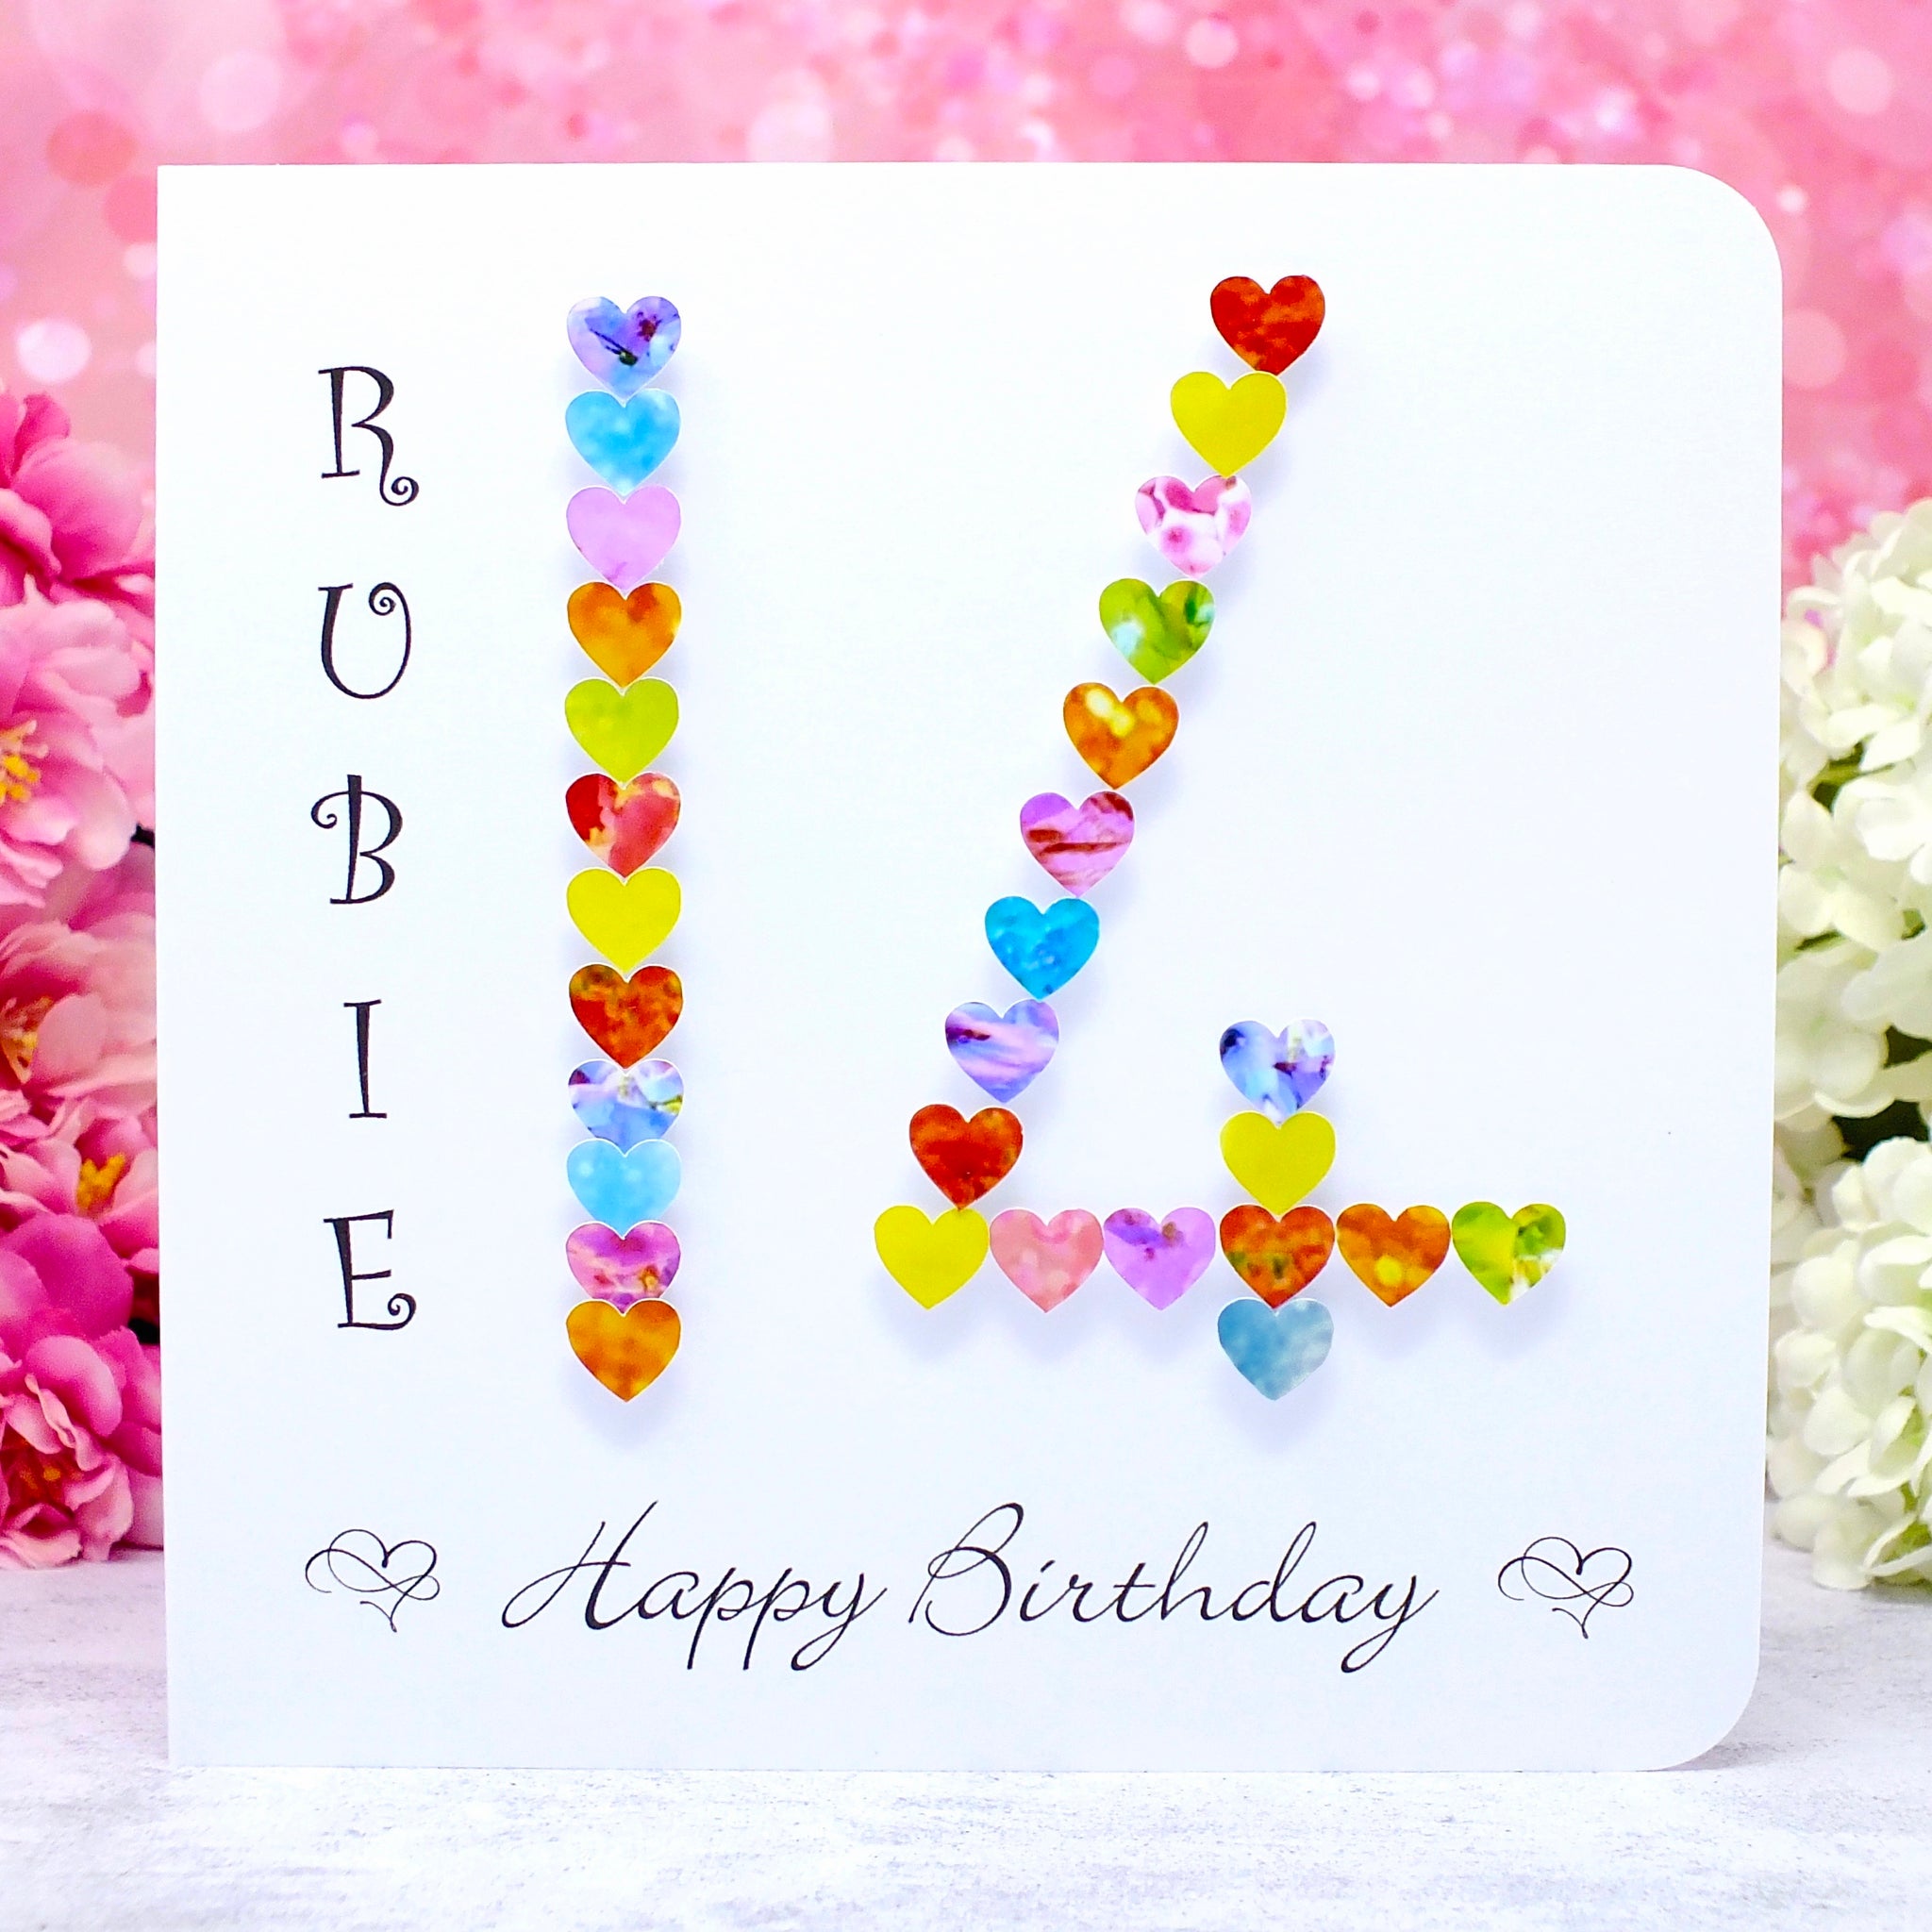 Personalized 14th Birthday Card with Vibrant Hearts - Handmade and Unique | Bright Heart Design